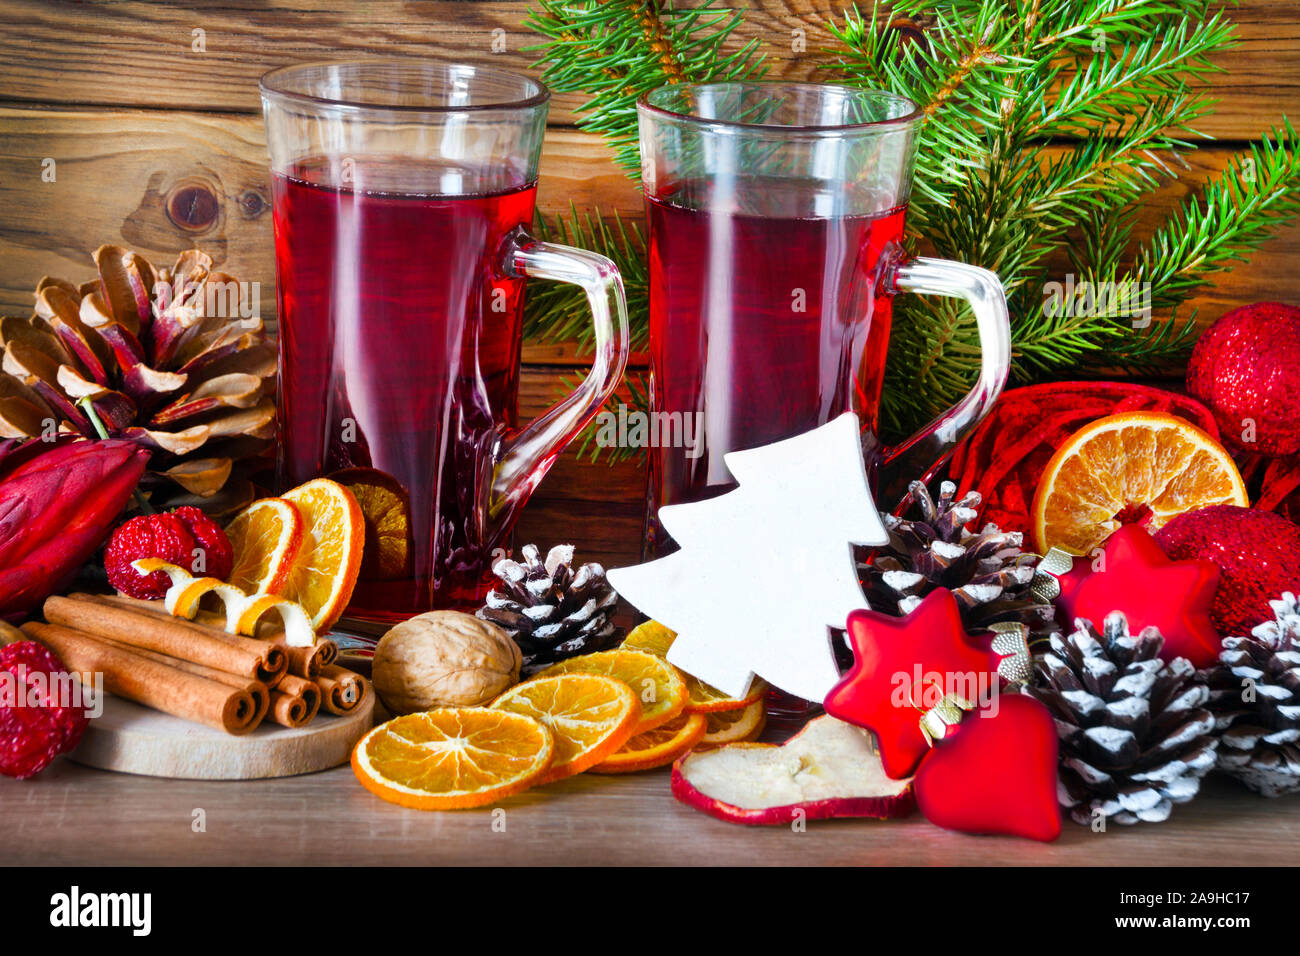 Two glasses of hot spiced wine Stock Photo